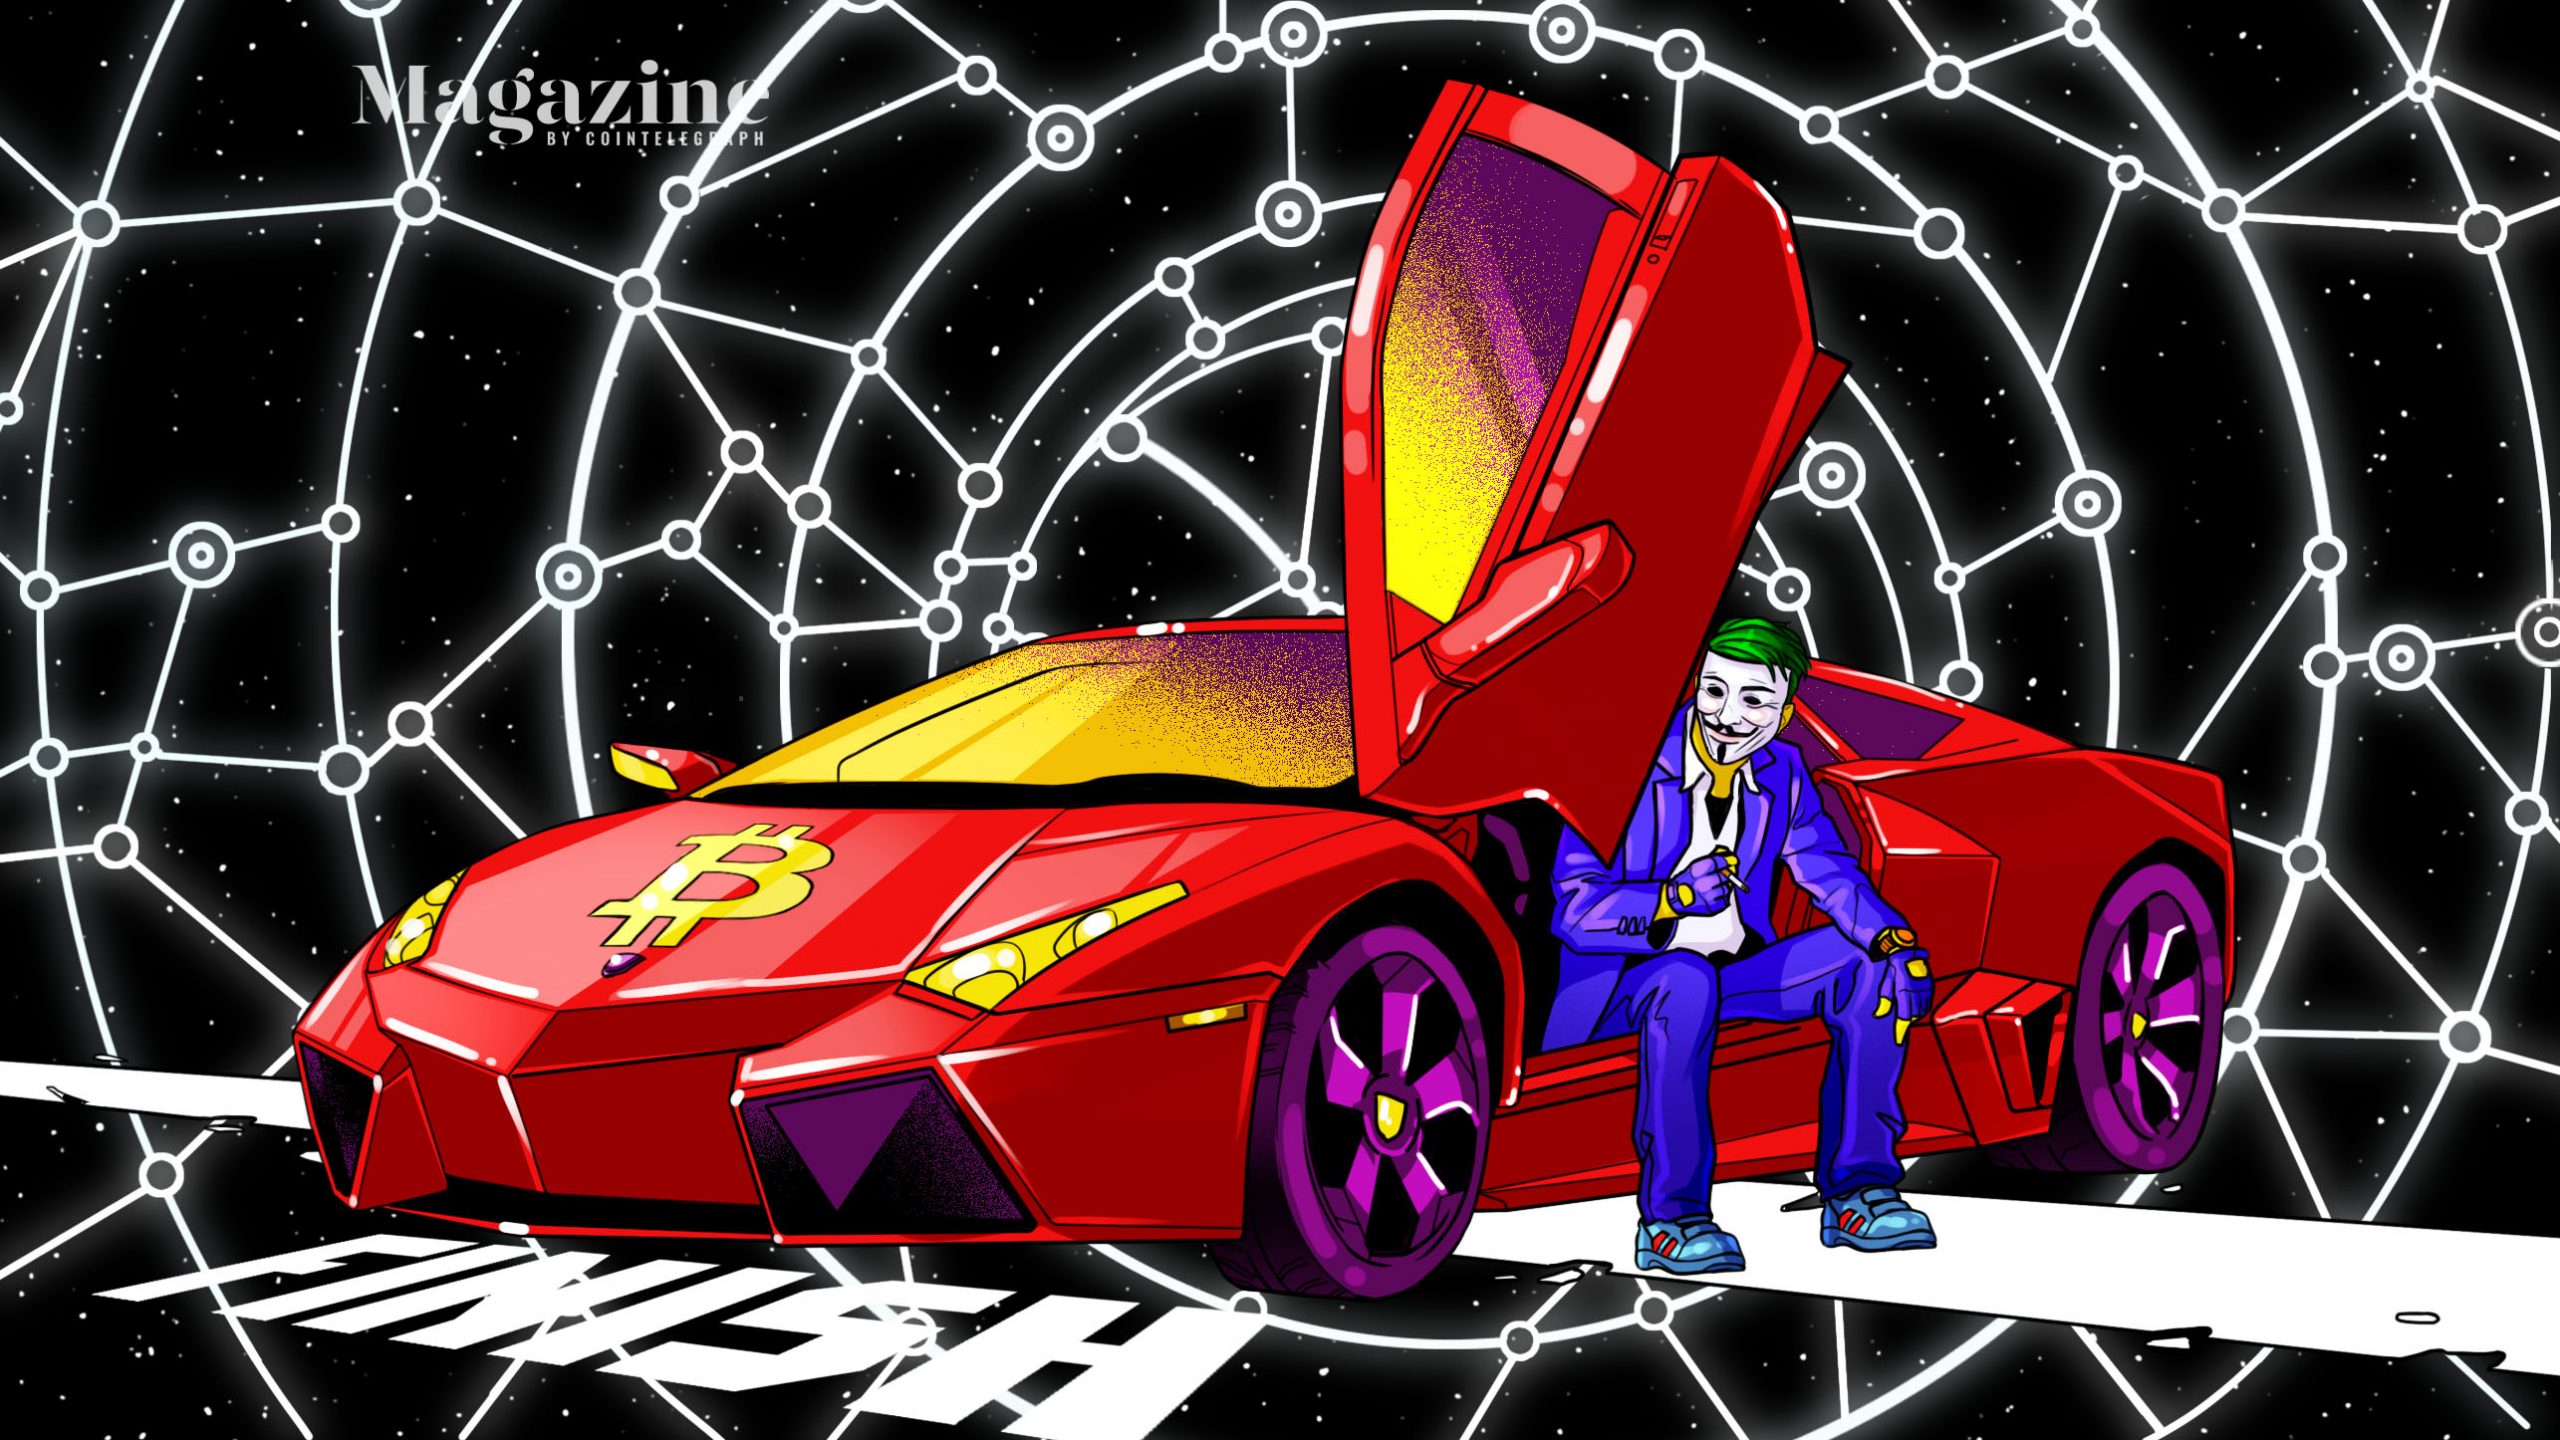 We tracked down the unique Bitcoin Lambo man – Cointelegraph Journal